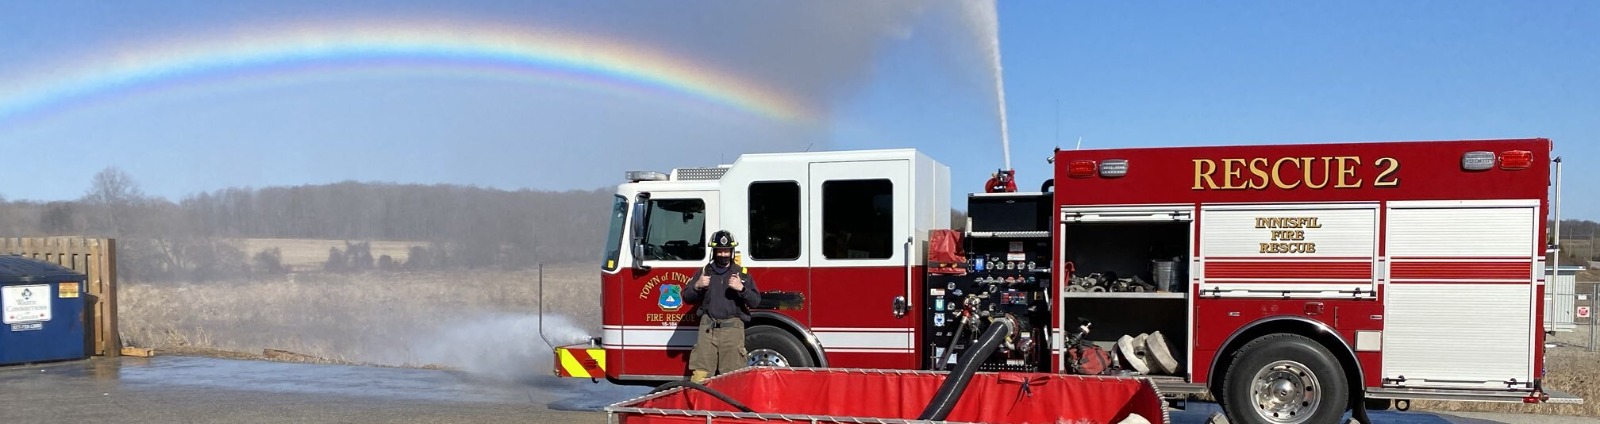 Firefighter standing in front of fire truck with rainbow in sky background